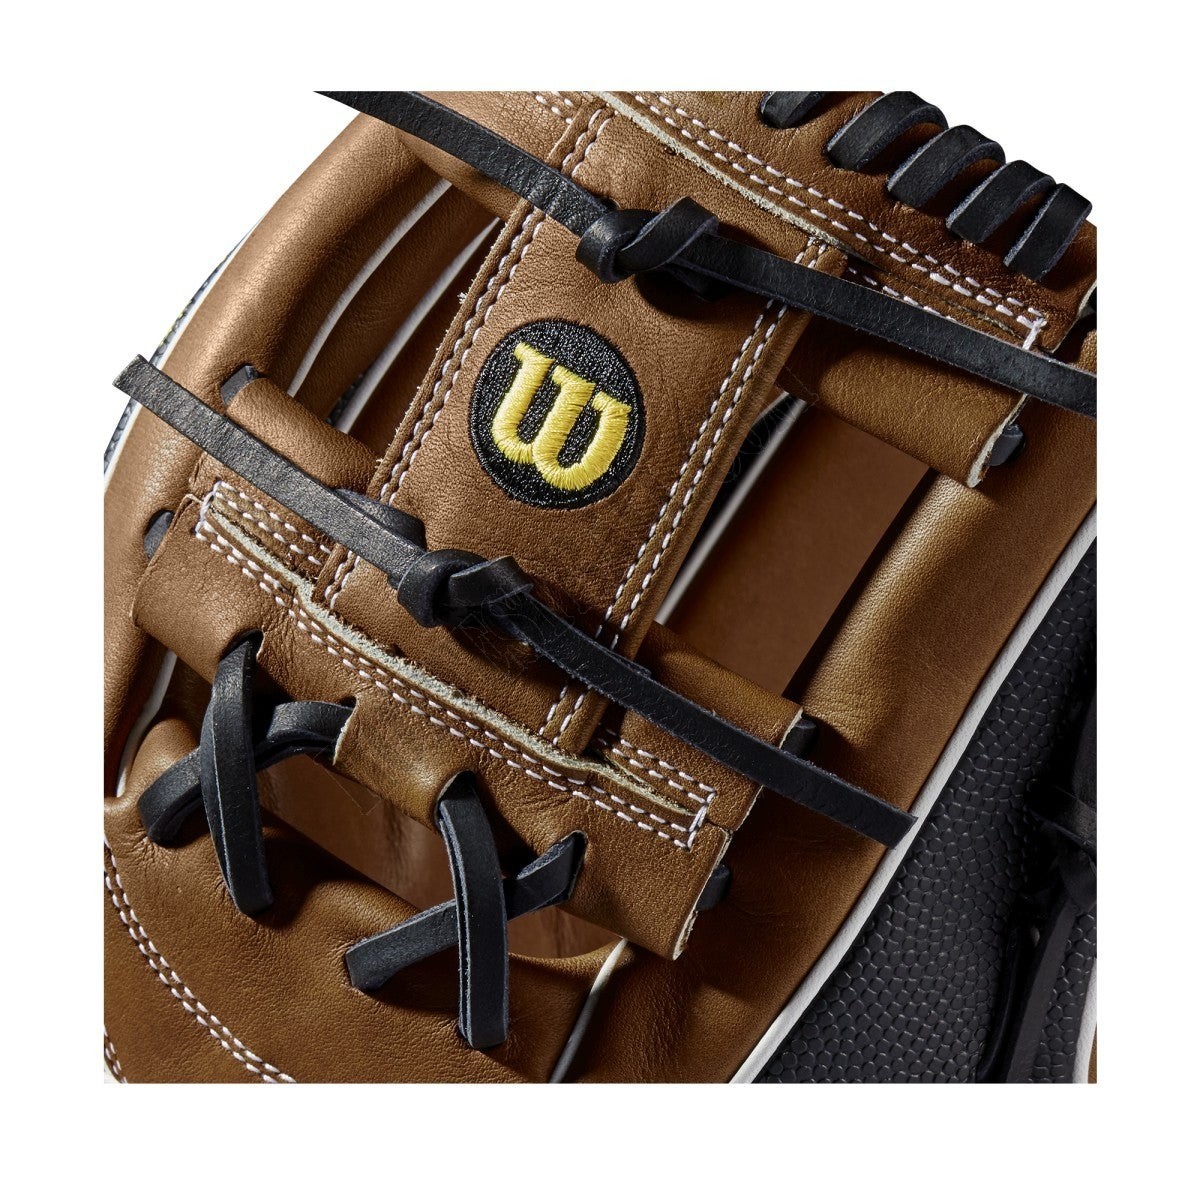 2019 A2000 1787 SuperSkin 11.75" Infield Baseball Glove - Right Hand Throw ● Wilson Promotions - -5